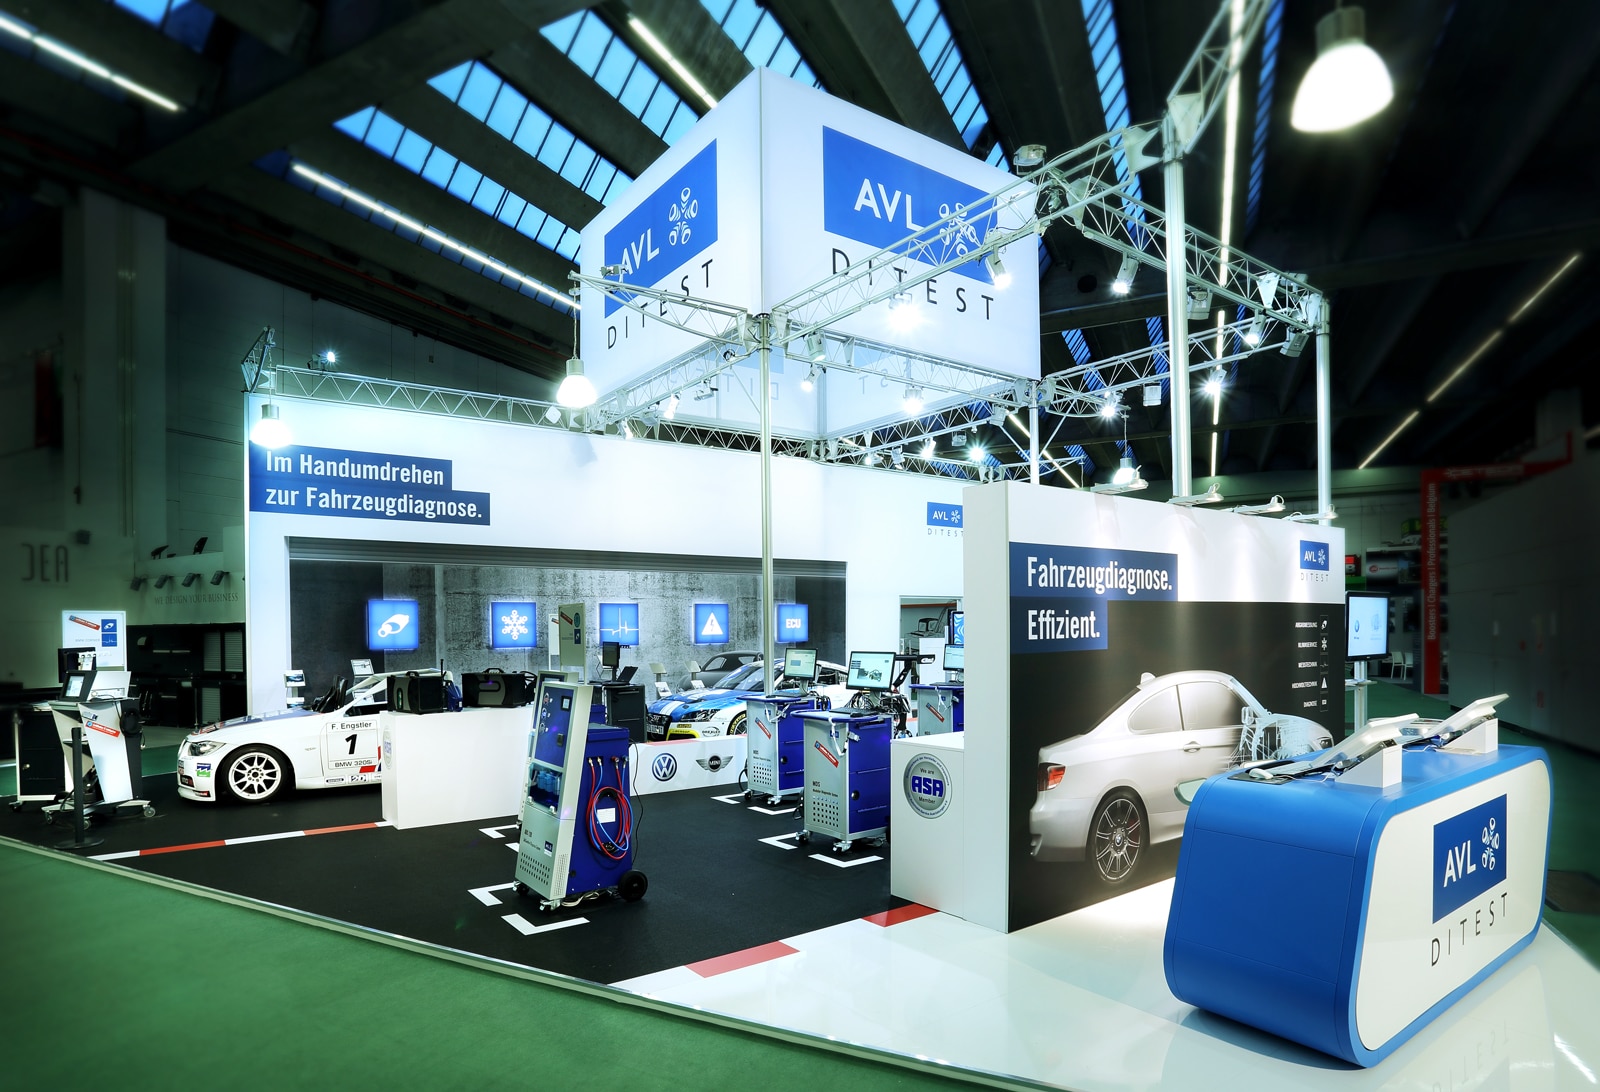 In Pole-Position: AVL DiTEST Messestand